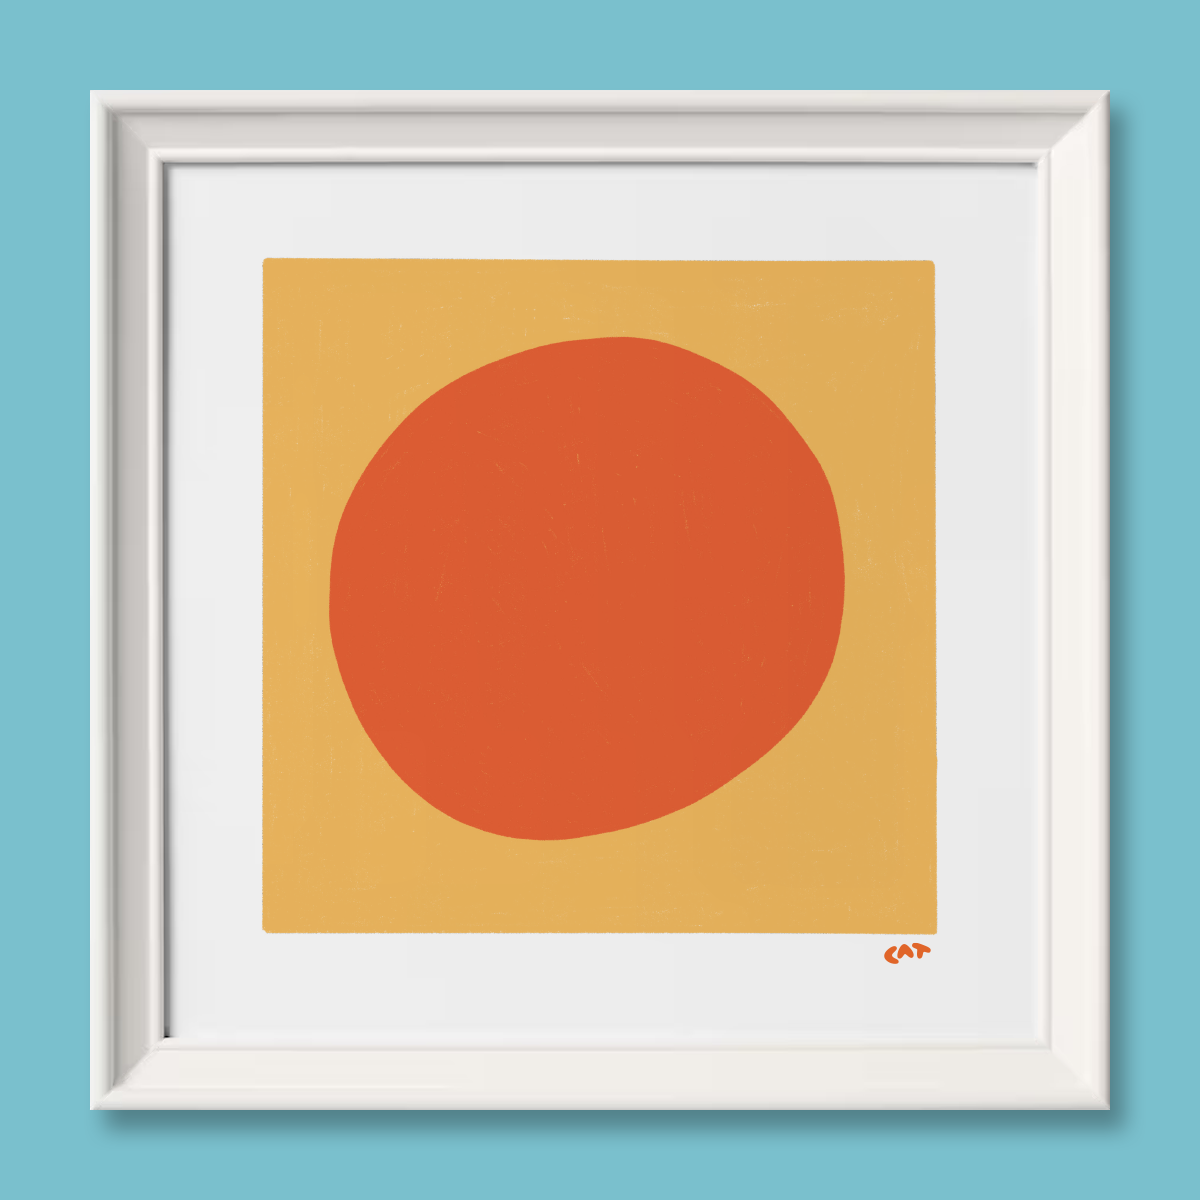 White framed print of a yellow square with an orange dot in the middle of the square.